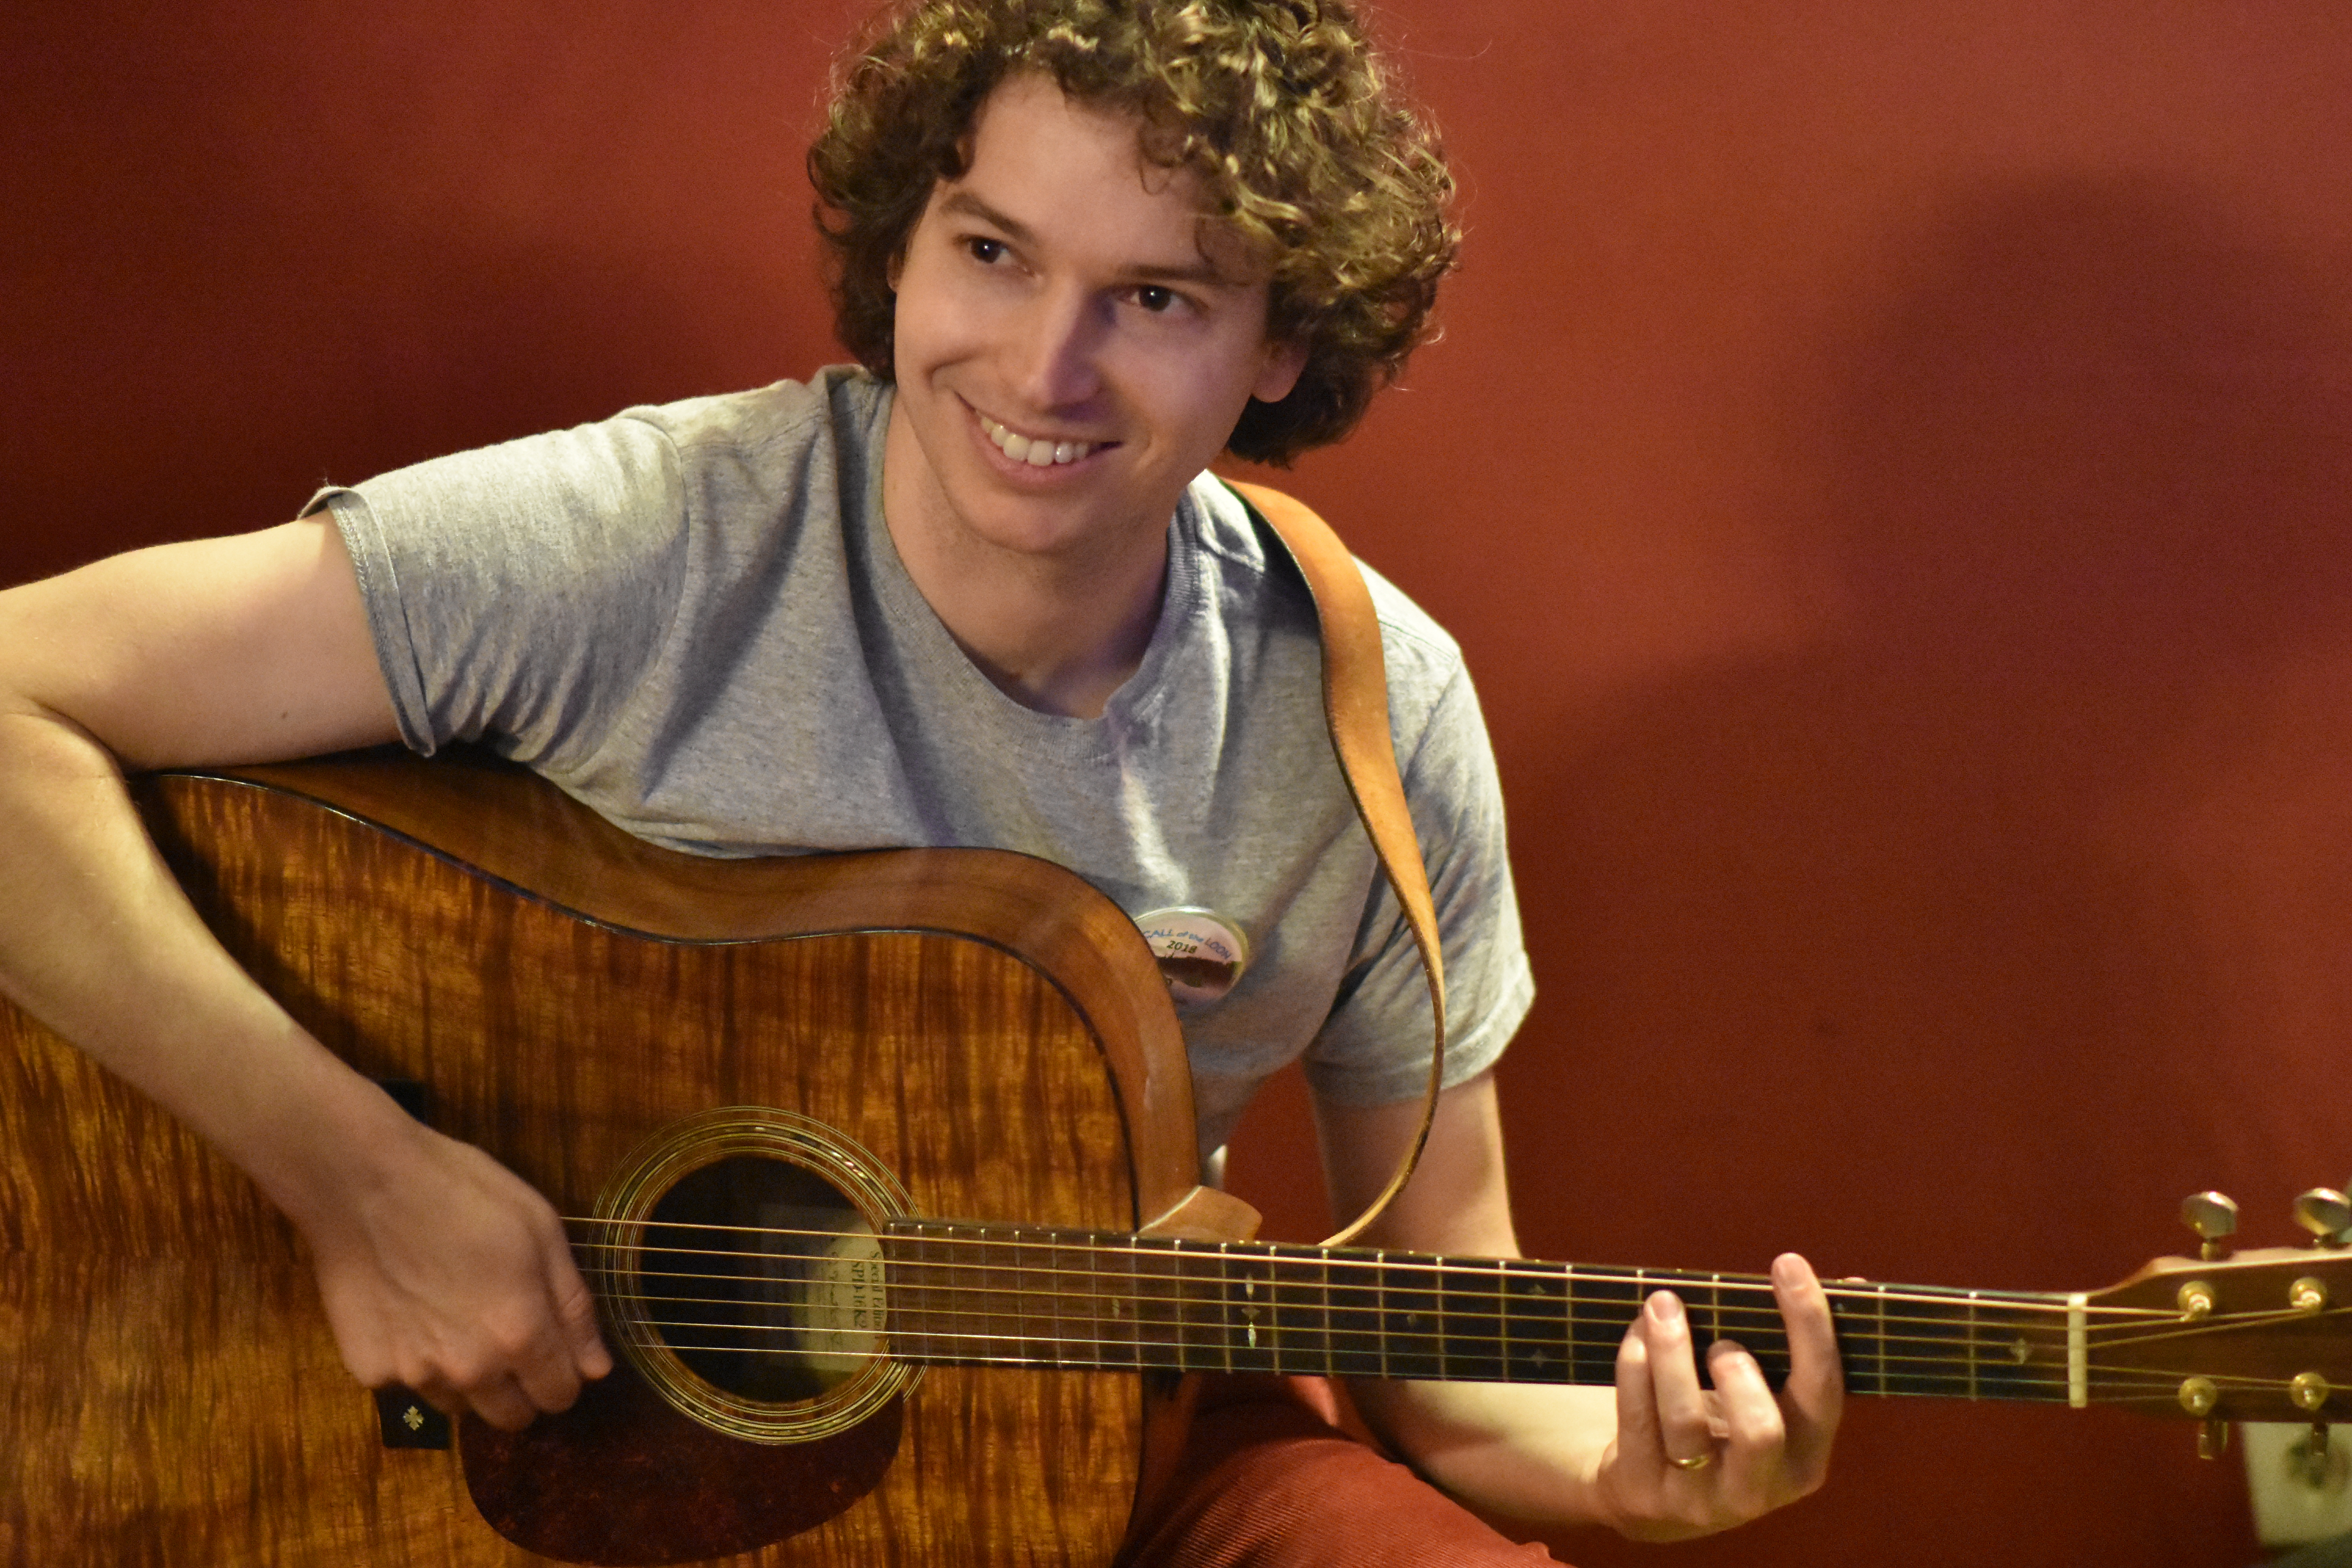 Owen Morrison, a man with curly brown hair is wearing a grey tee-shirt and smiling. He is sitting and playing a dark-colored guitar.